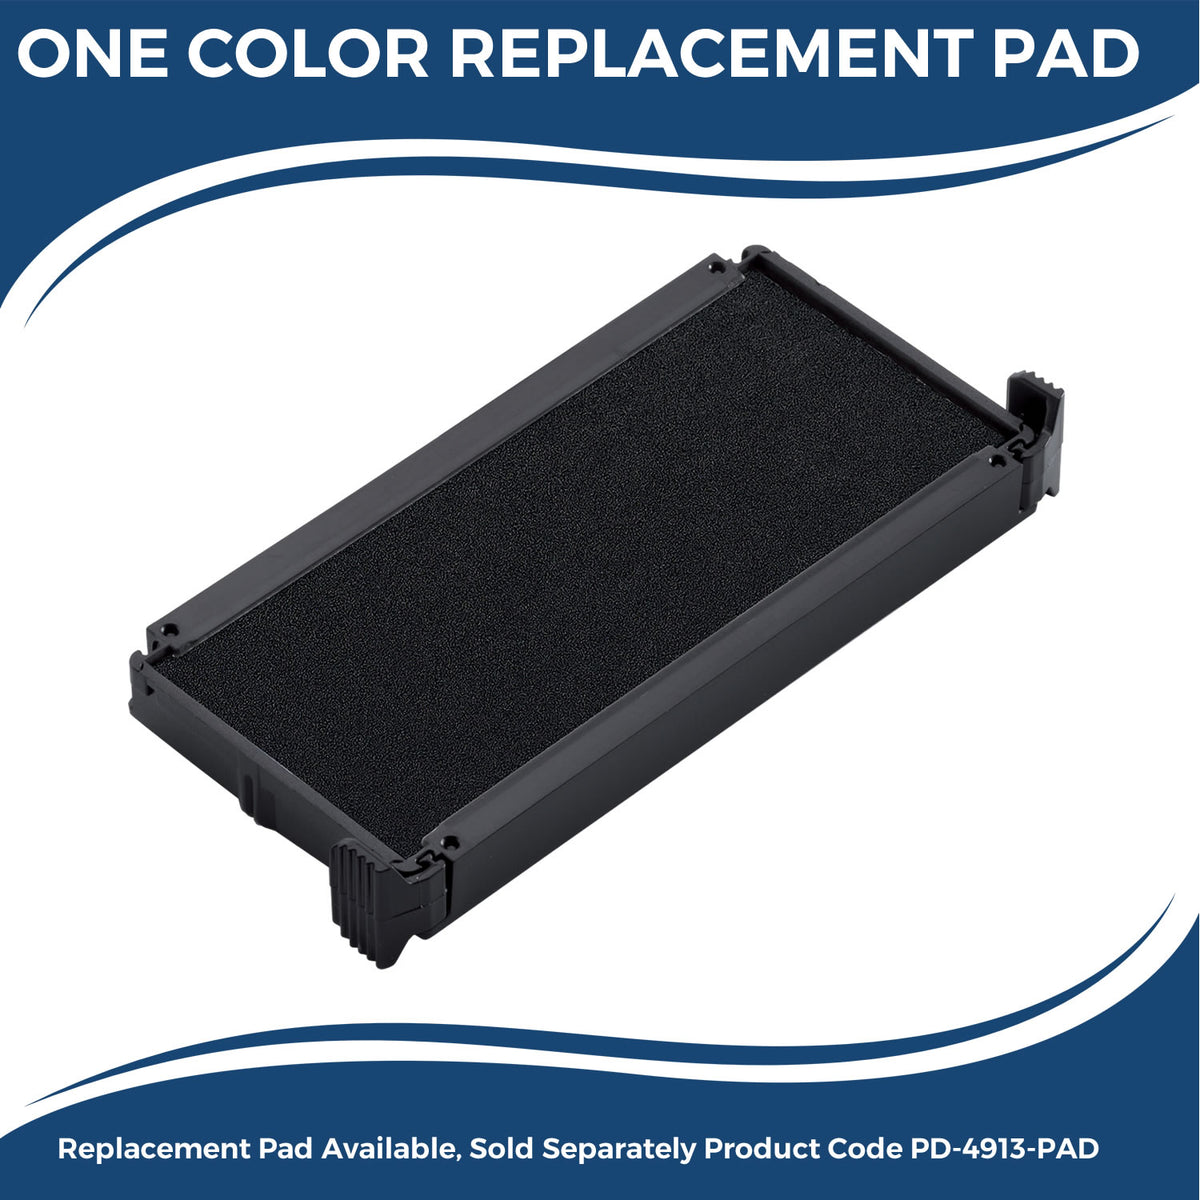 Large Self-Inking Bold Copy Stamp 4897S Large Replacment Pad